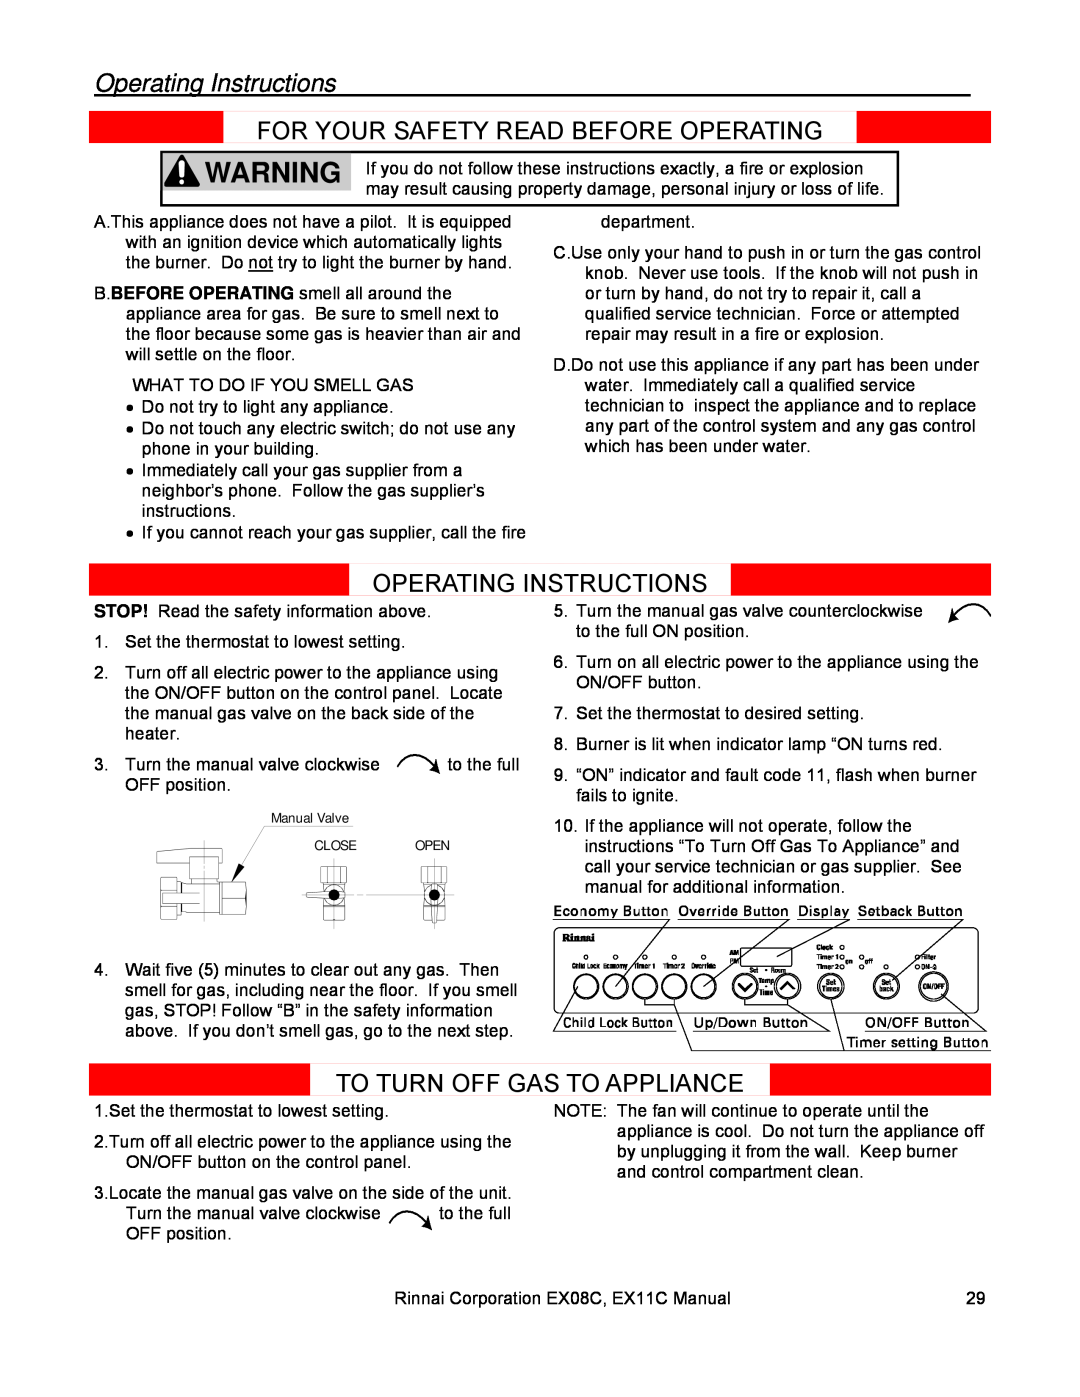 Rinnai EX08C (RHFE-202FTA) Operating Instructions, For Your Safety Read Before Operating, To Turn Off Gas To Appliance 